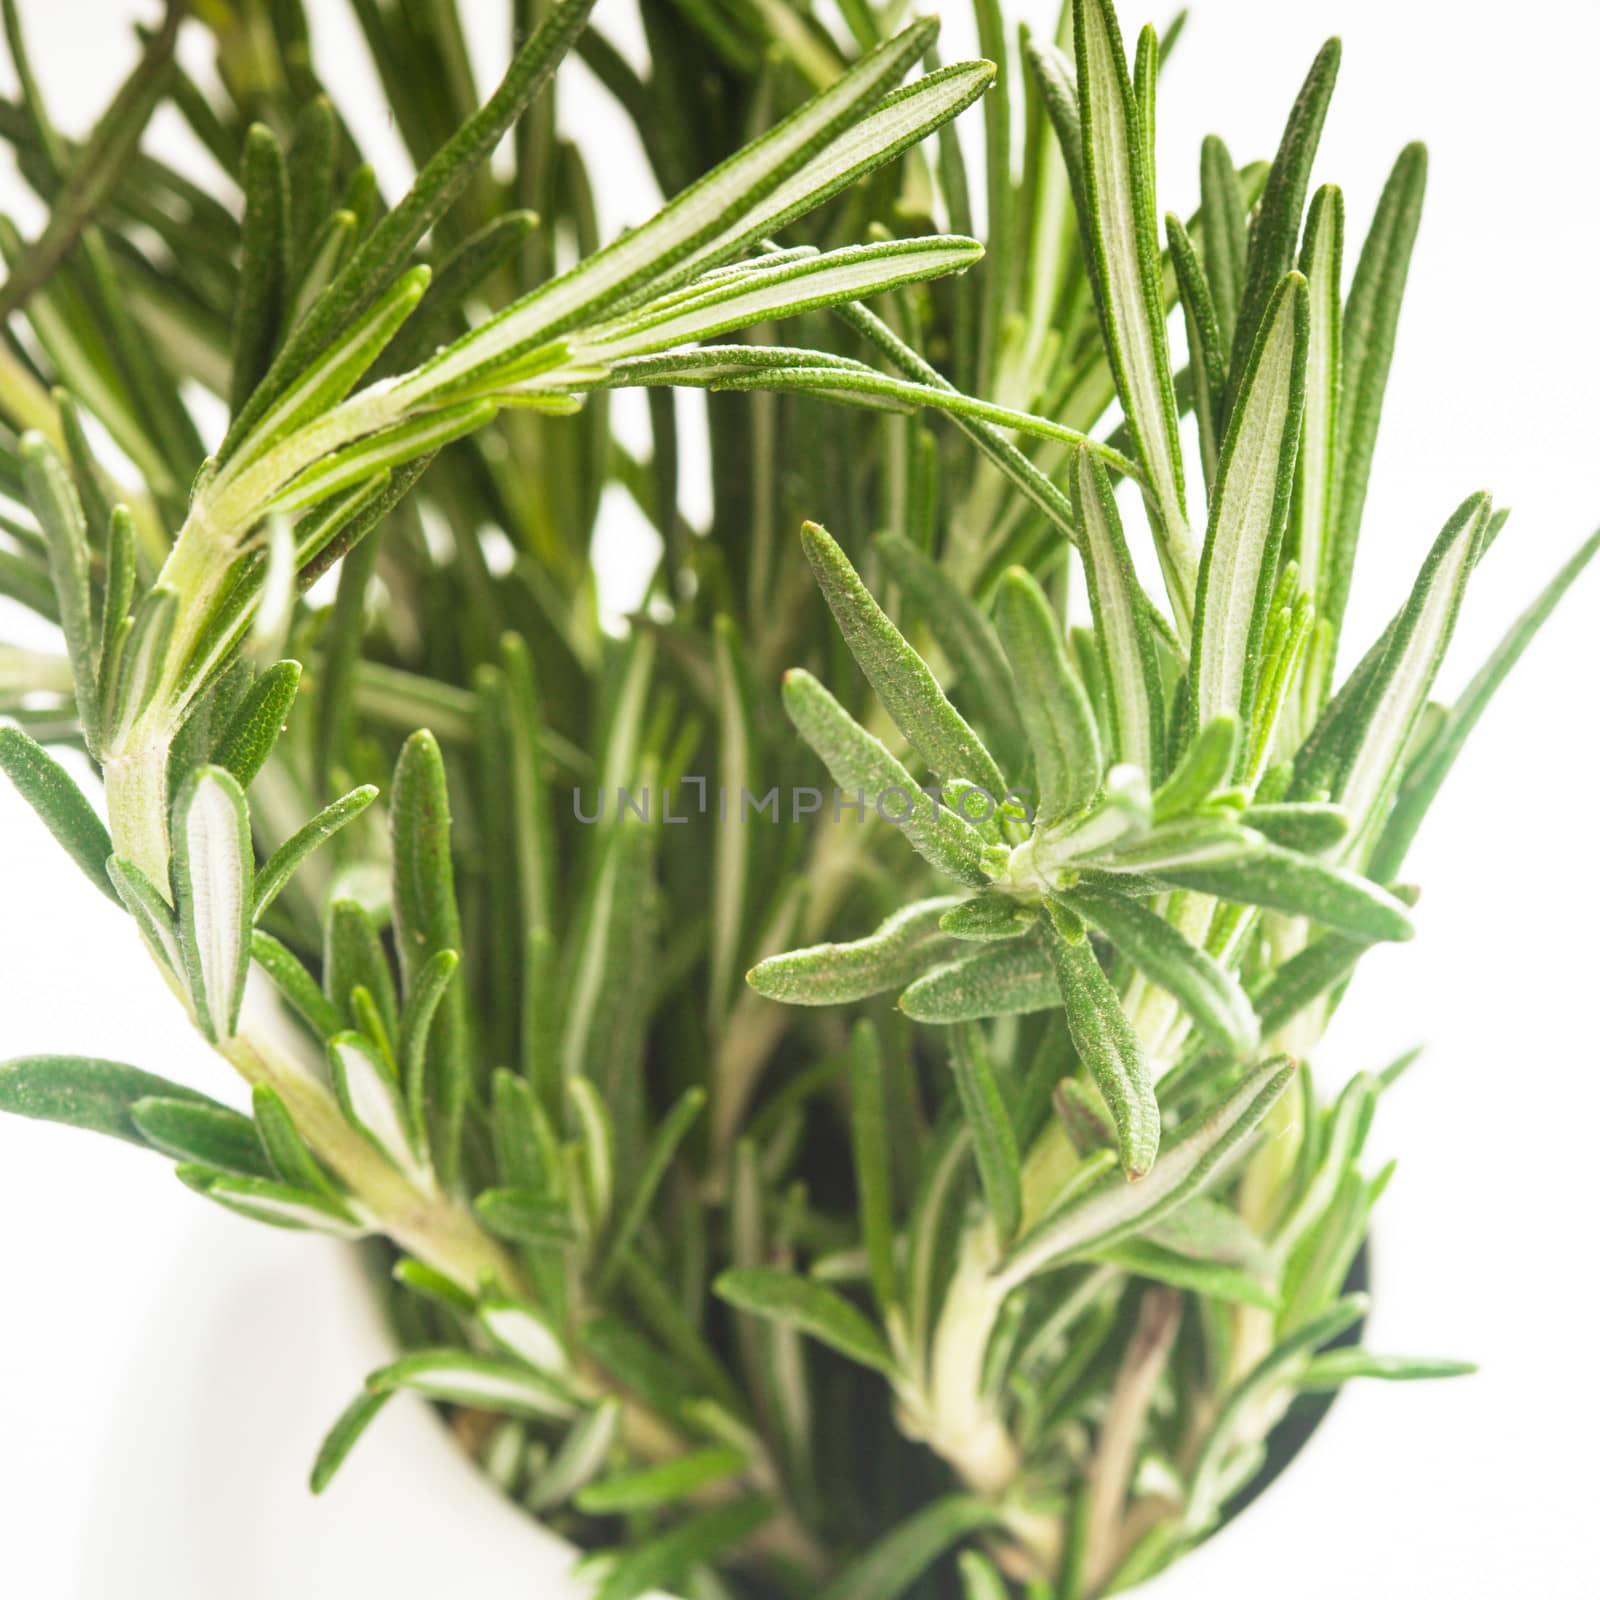 rosemary leaf close up in white cup